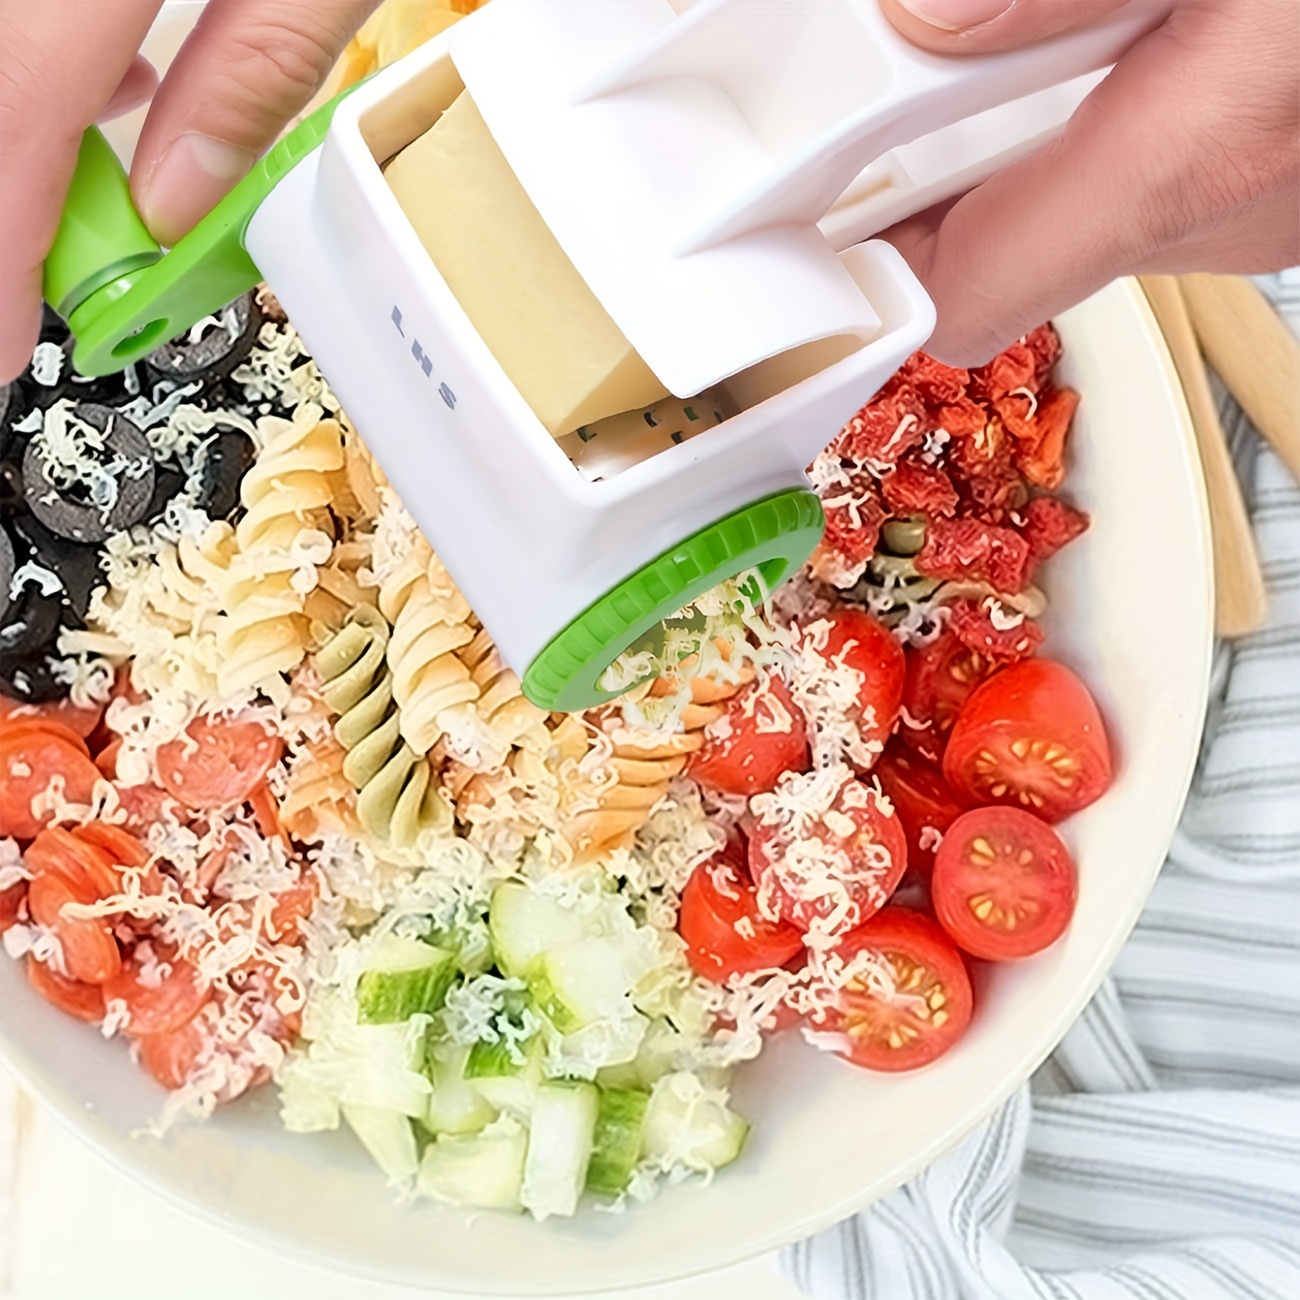 Restaurant Cheese Grater - Handheld Rotary Cheese Grater for